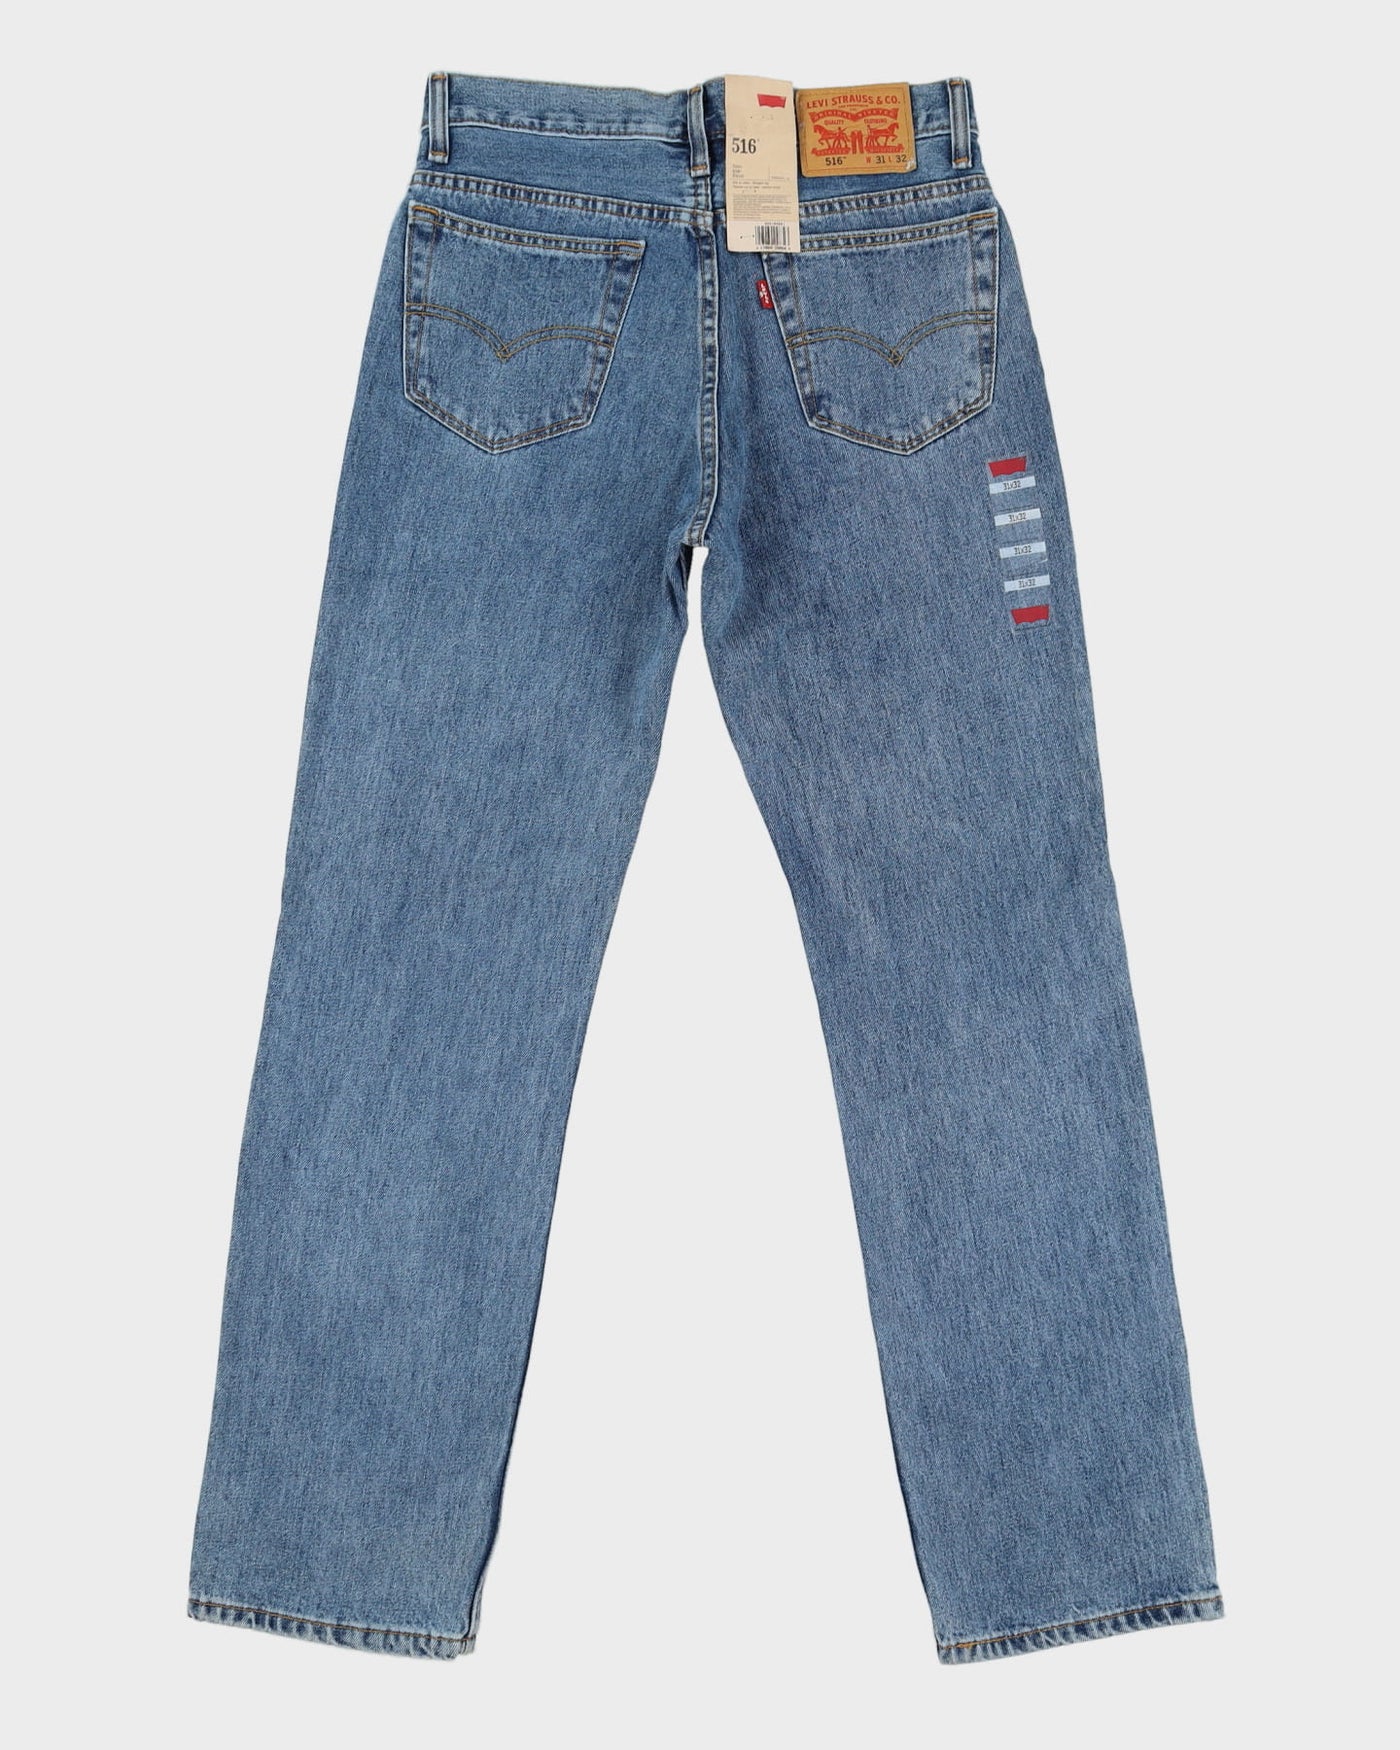 Deadstock With Tags Levi's 516 Slim Medium Wash Blue Jeans - W31 L31